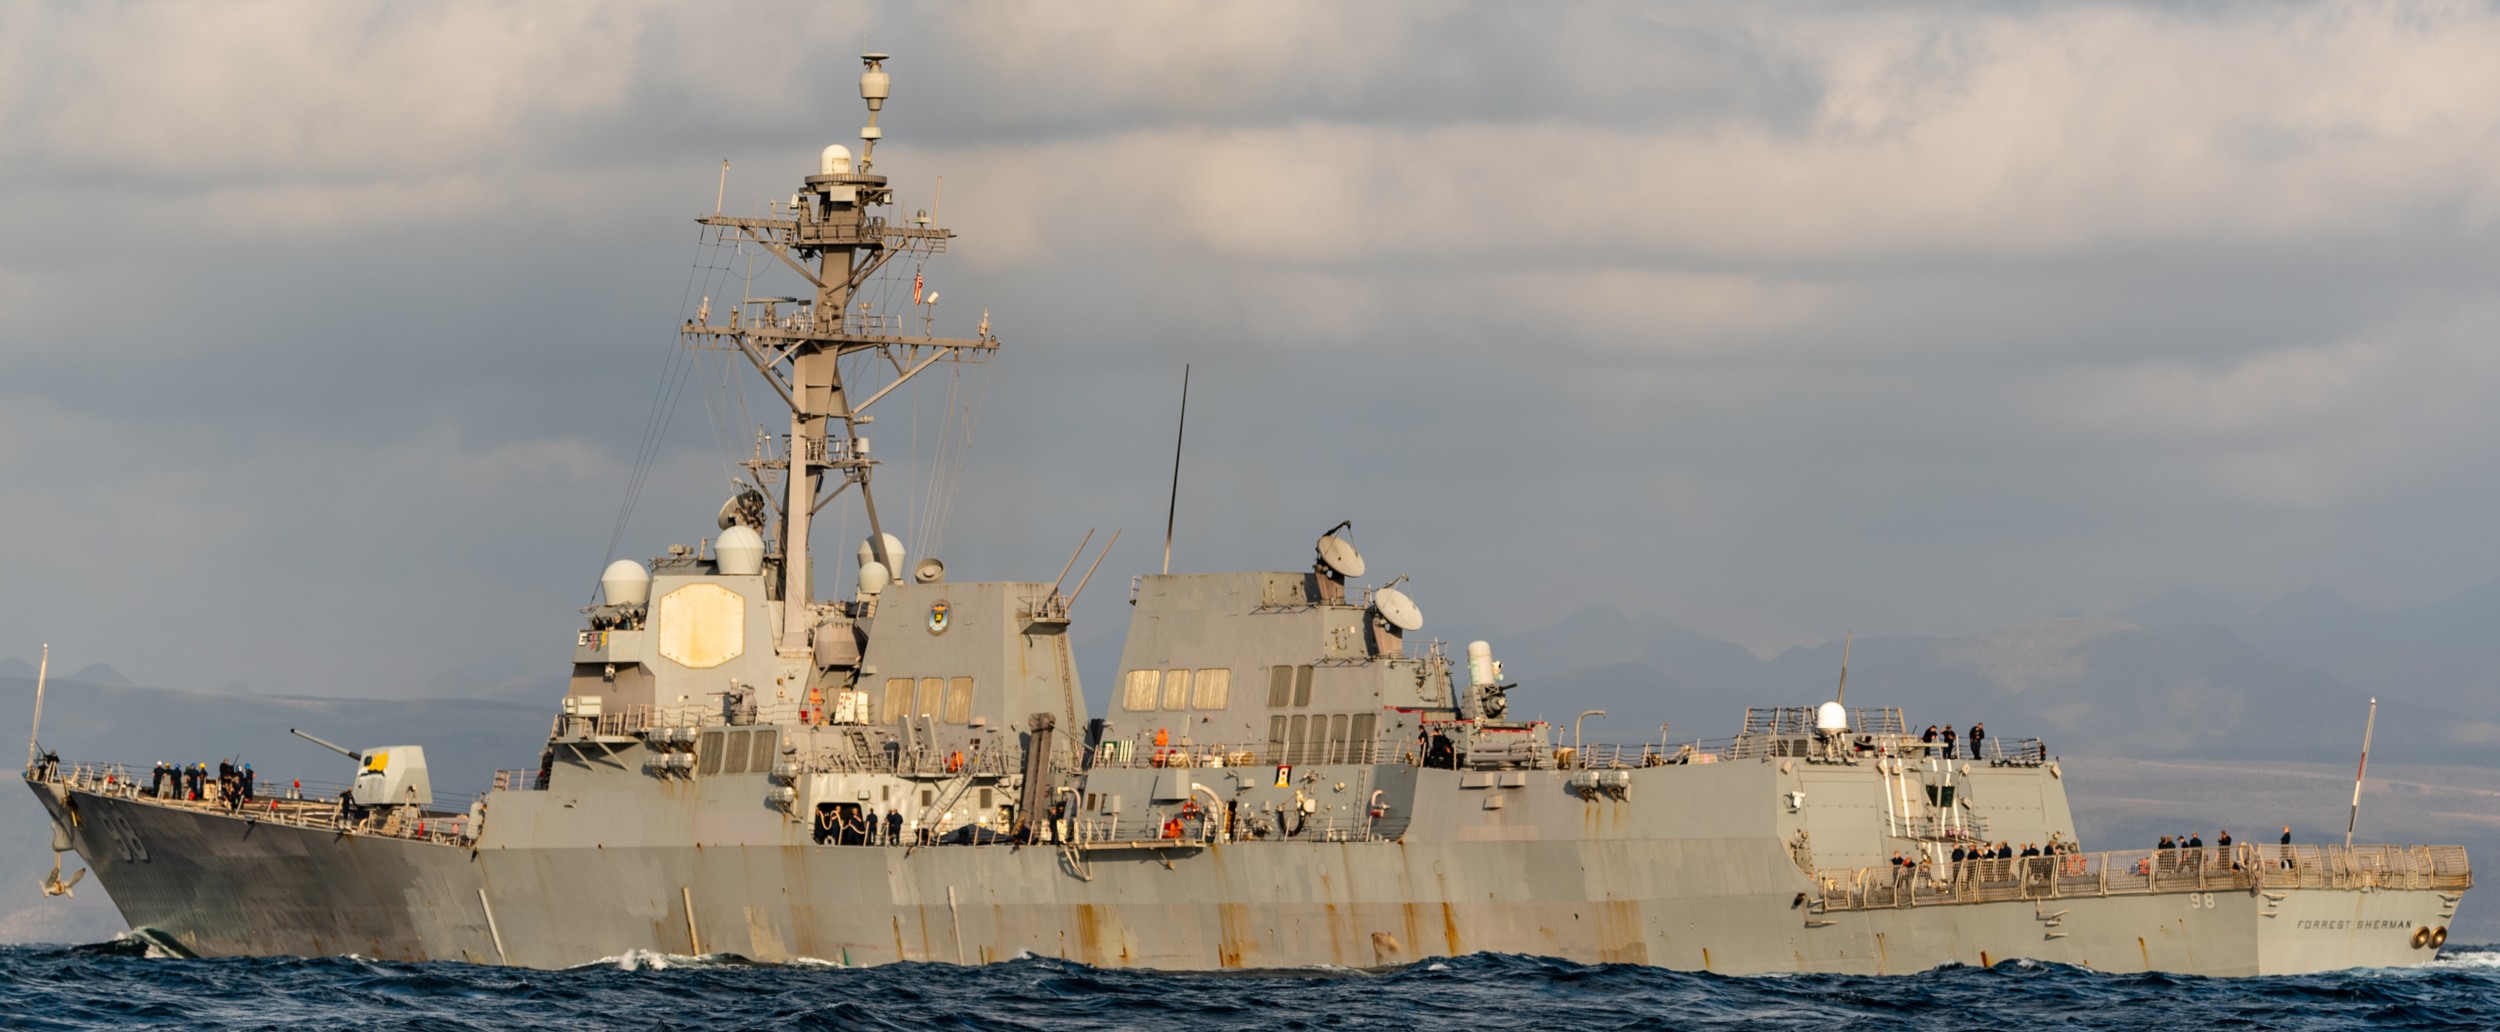 ddg-98 uss forrest sherman arleigh burke class guided missile destroyer aegis us navy djibouti 67